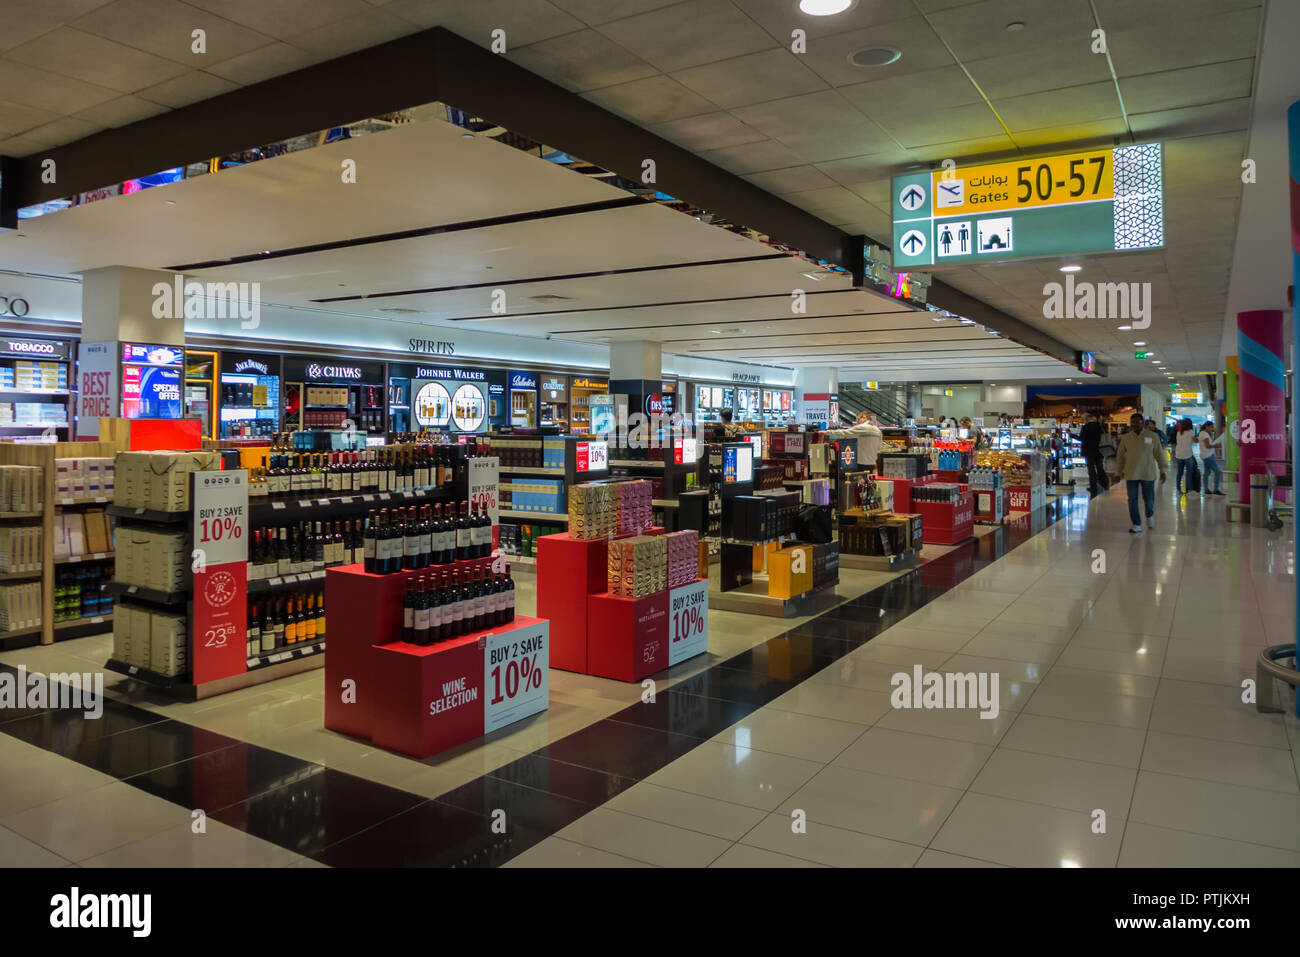 ABU DHABI,UNITED ARAB EMIRATES,APRIL 11,2018: The airport This is the duty free area of terminal 3,where you can buy alcohol,cigarettes,chocolat and p Stock Photo